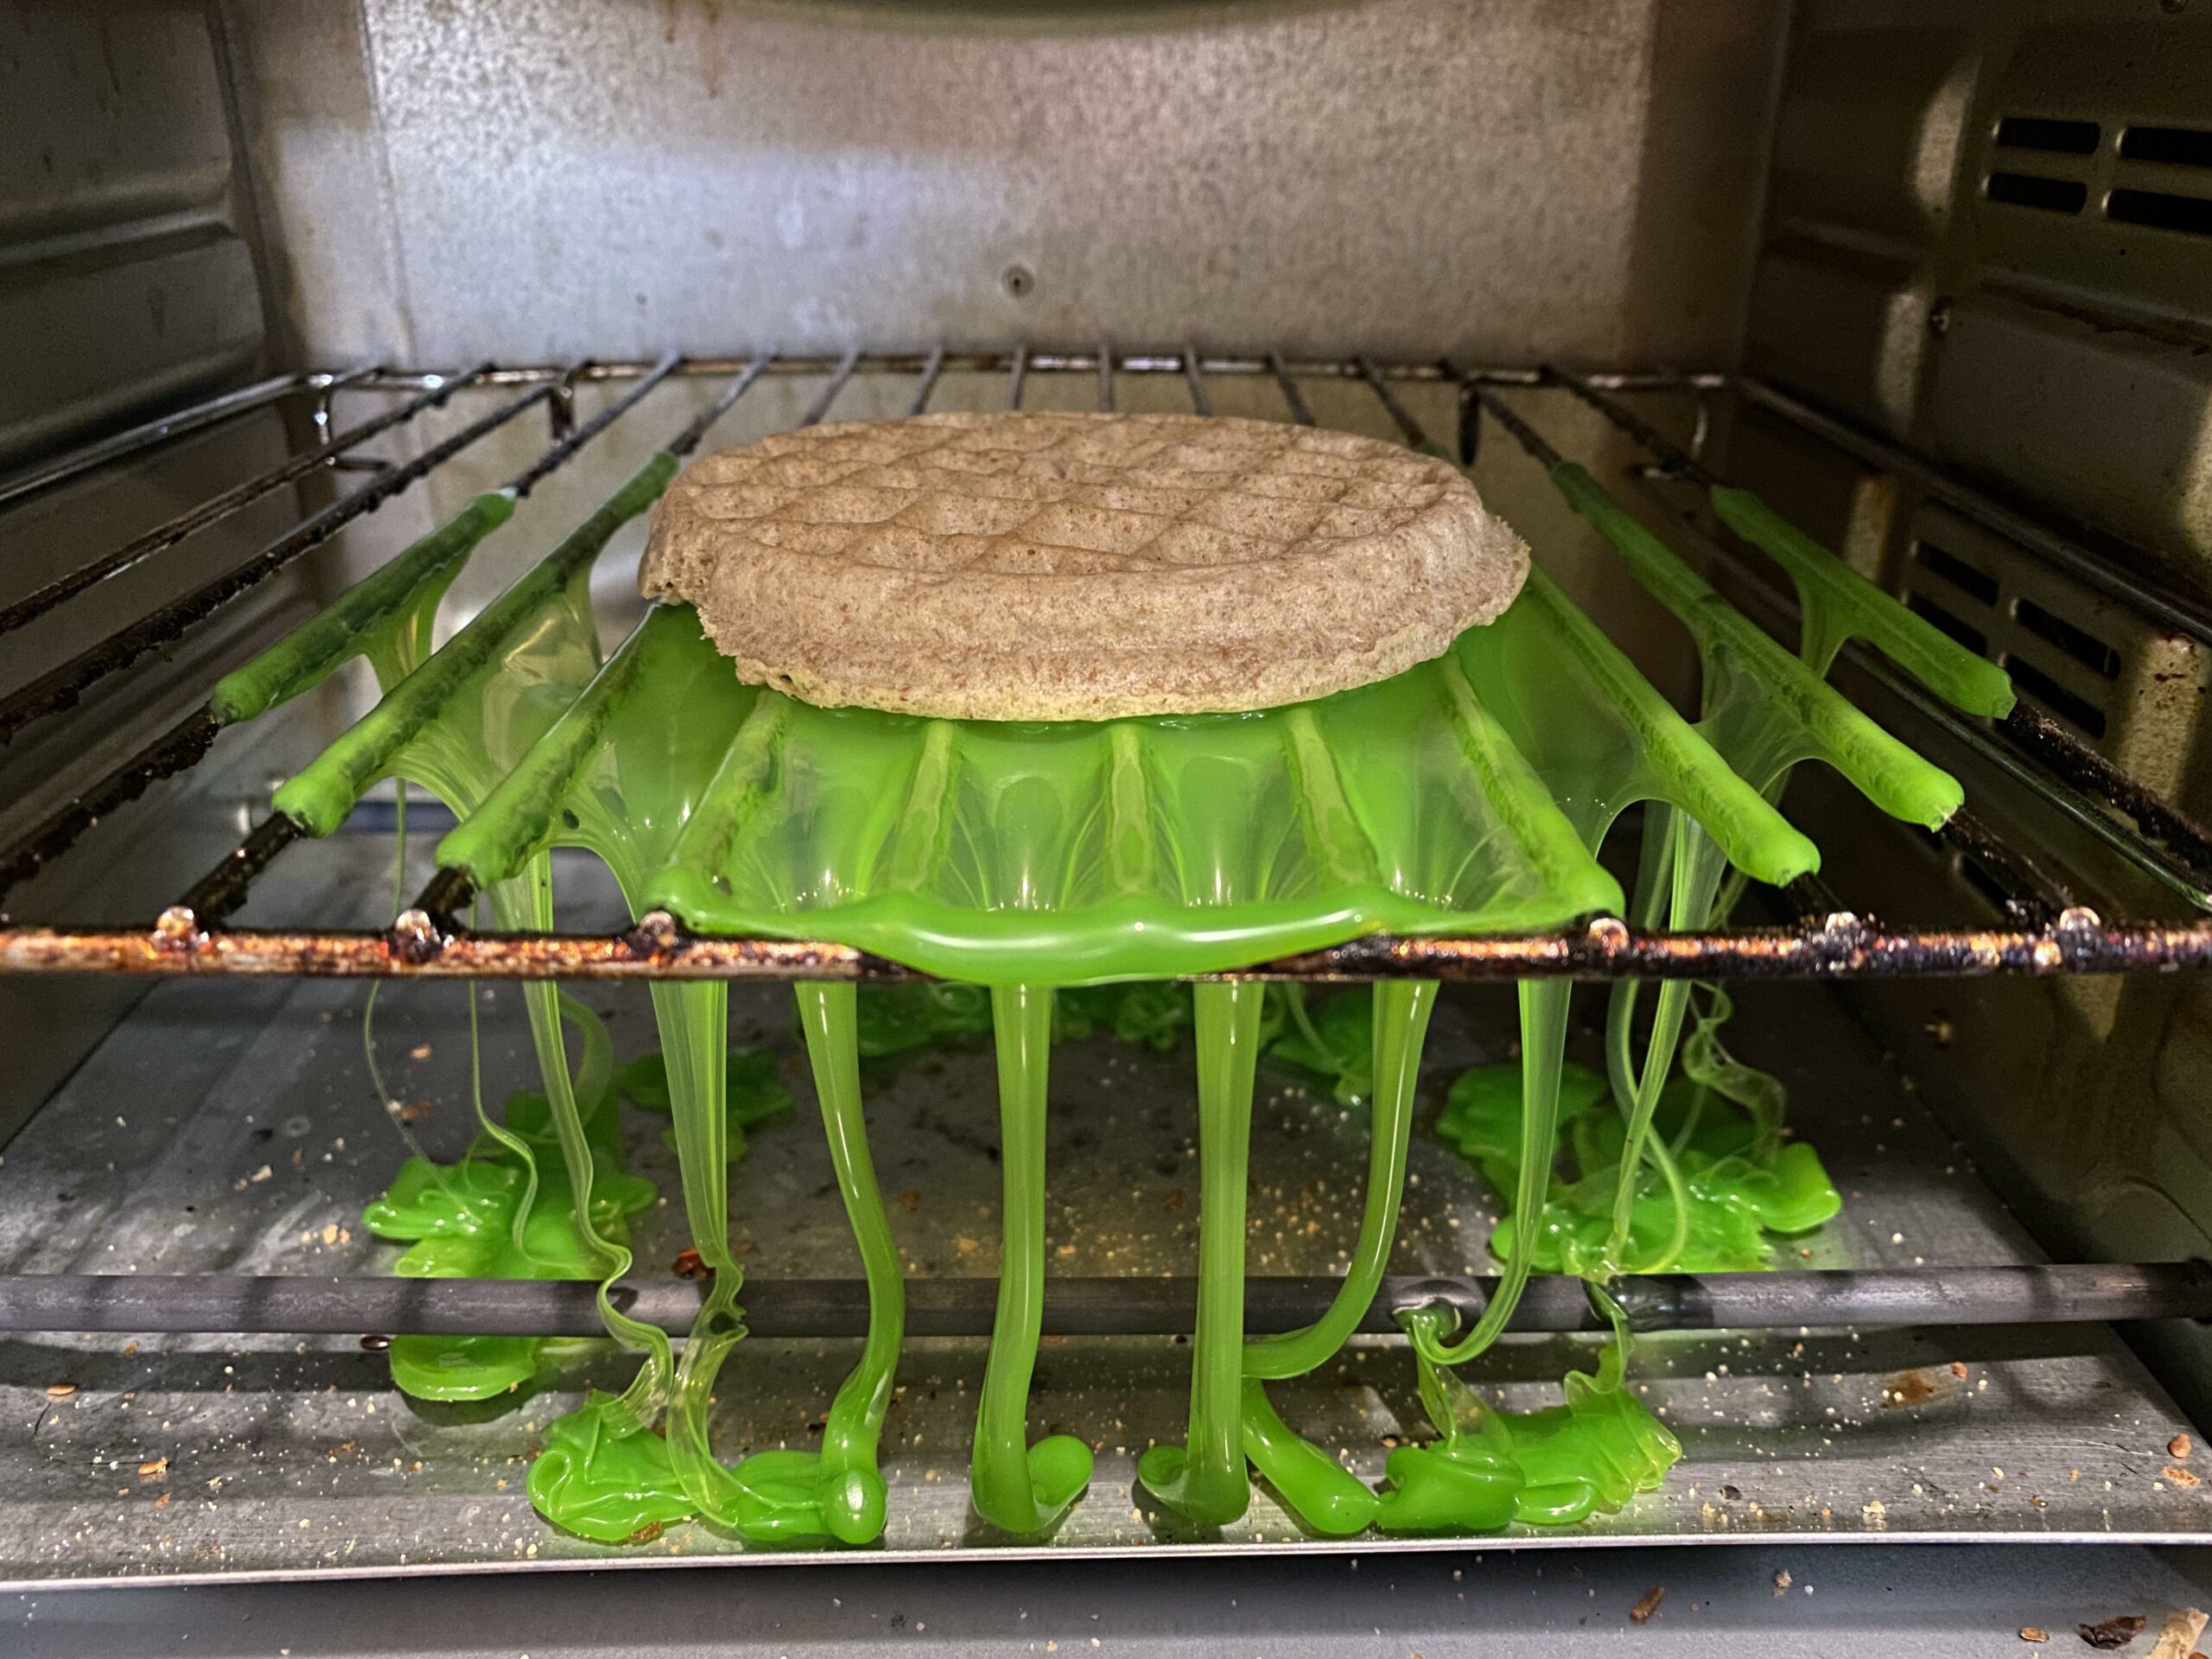 melted green plastic in the oven